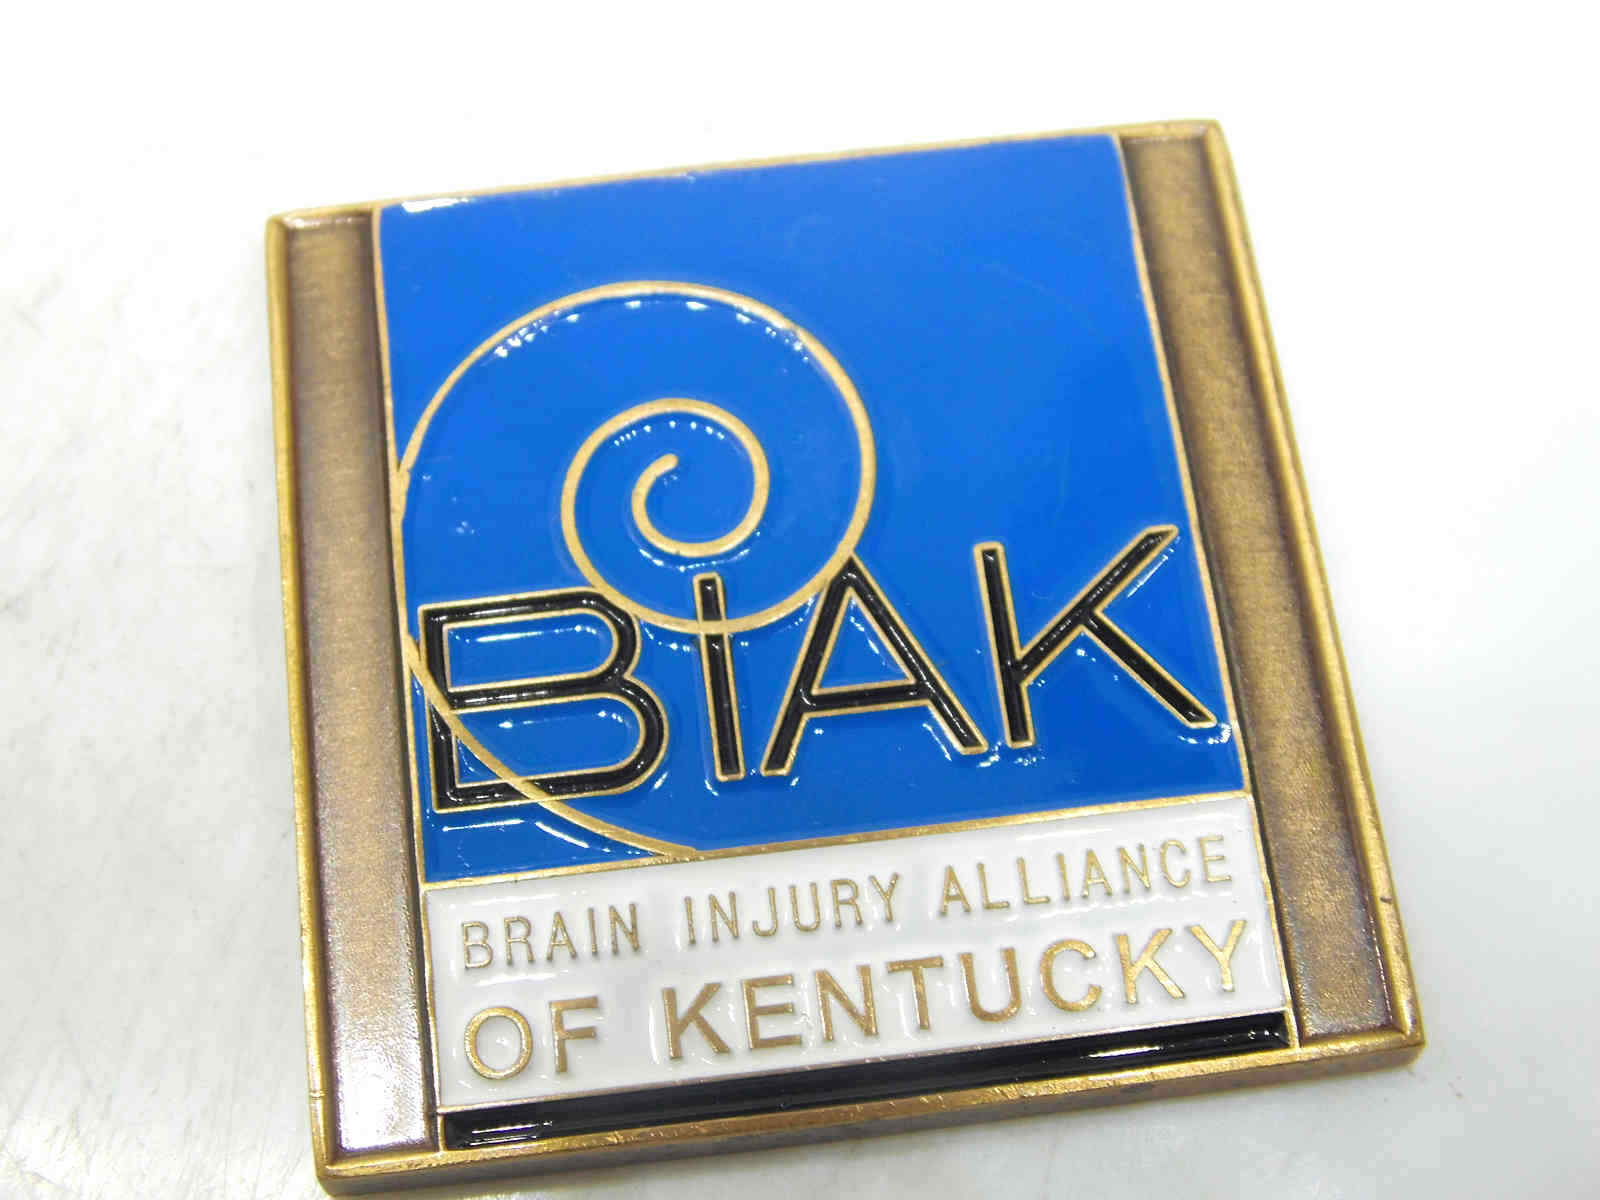 U.S. ARMED FORCES SUPPORTING BRAIN INJURY ALLIANCE OF KENTUCKY CHALLENGE COIN